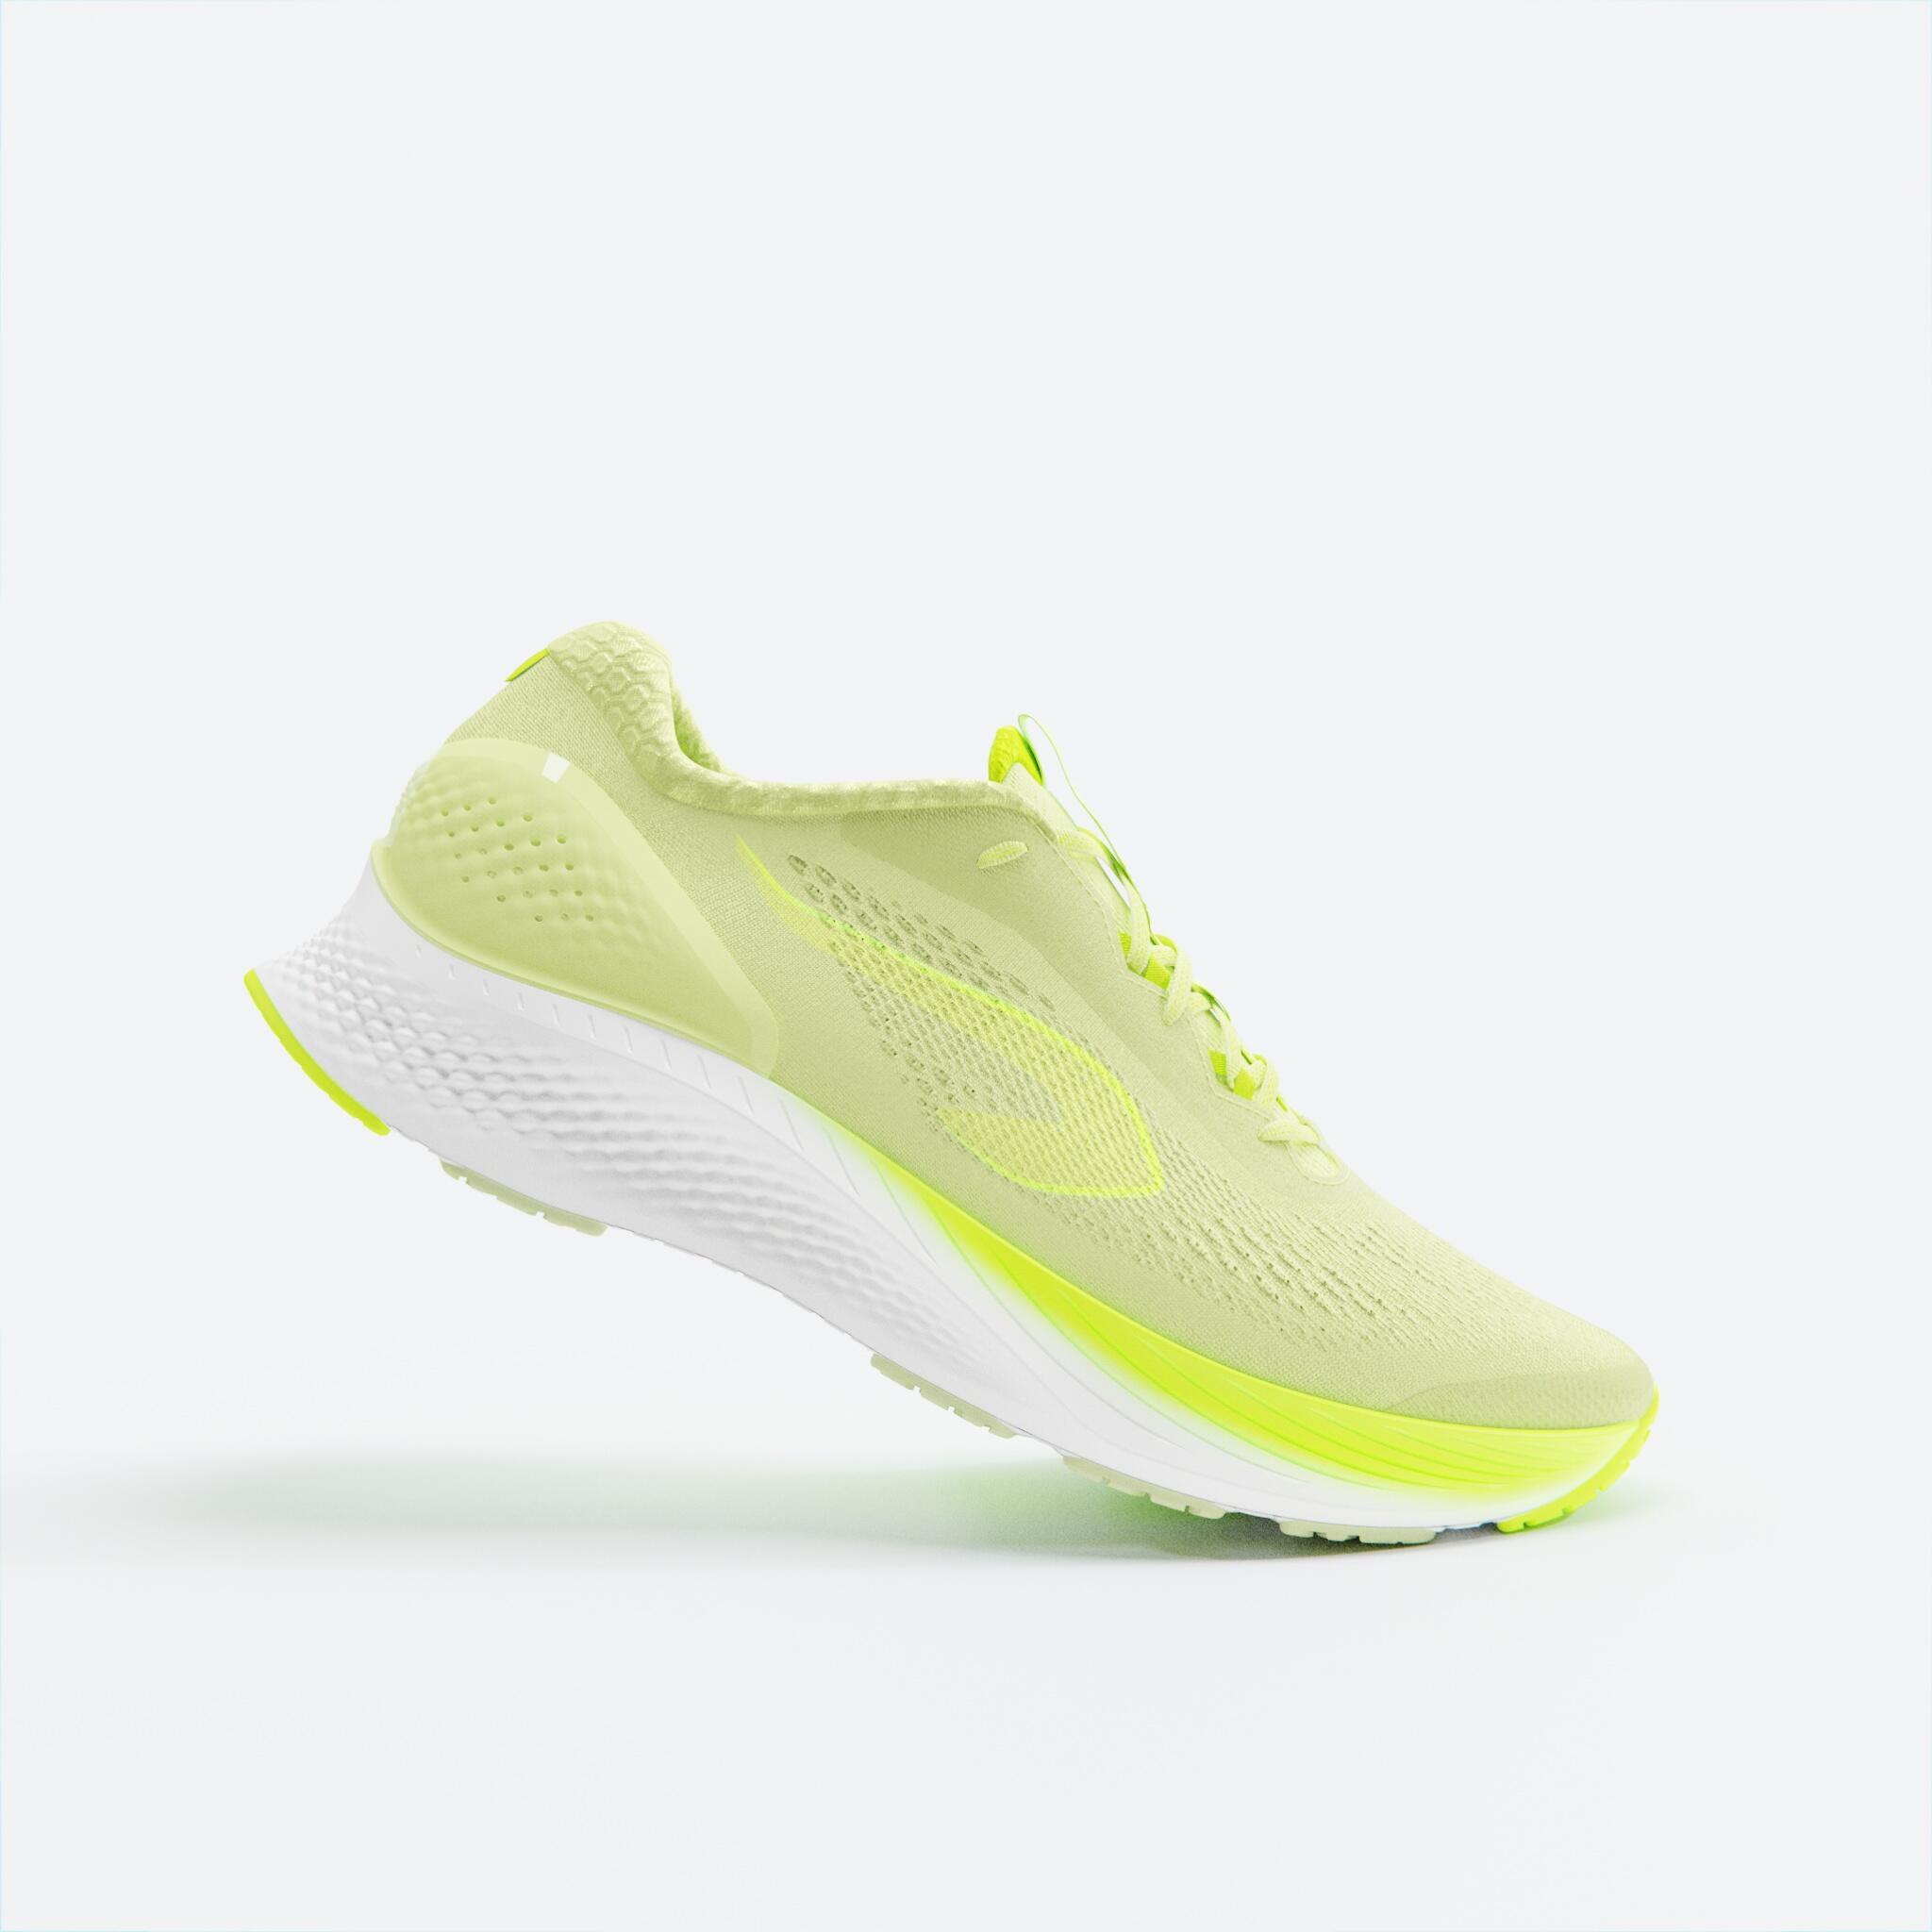 fluo pale yellow / fluo lime yellow